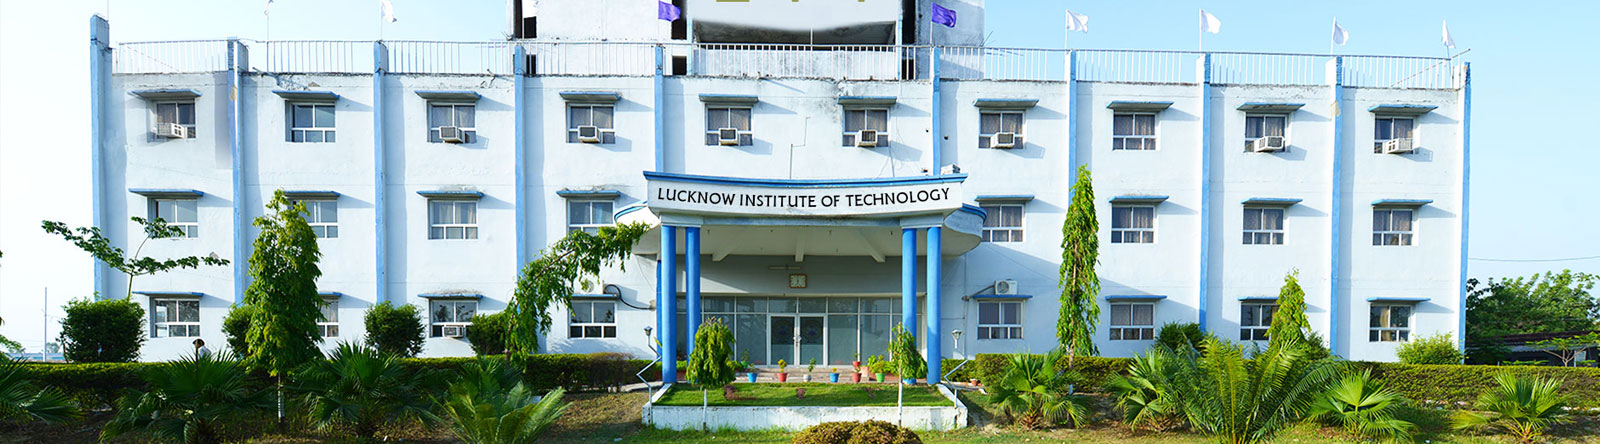 Lucknow Institute Of Technology, Lucknow Image